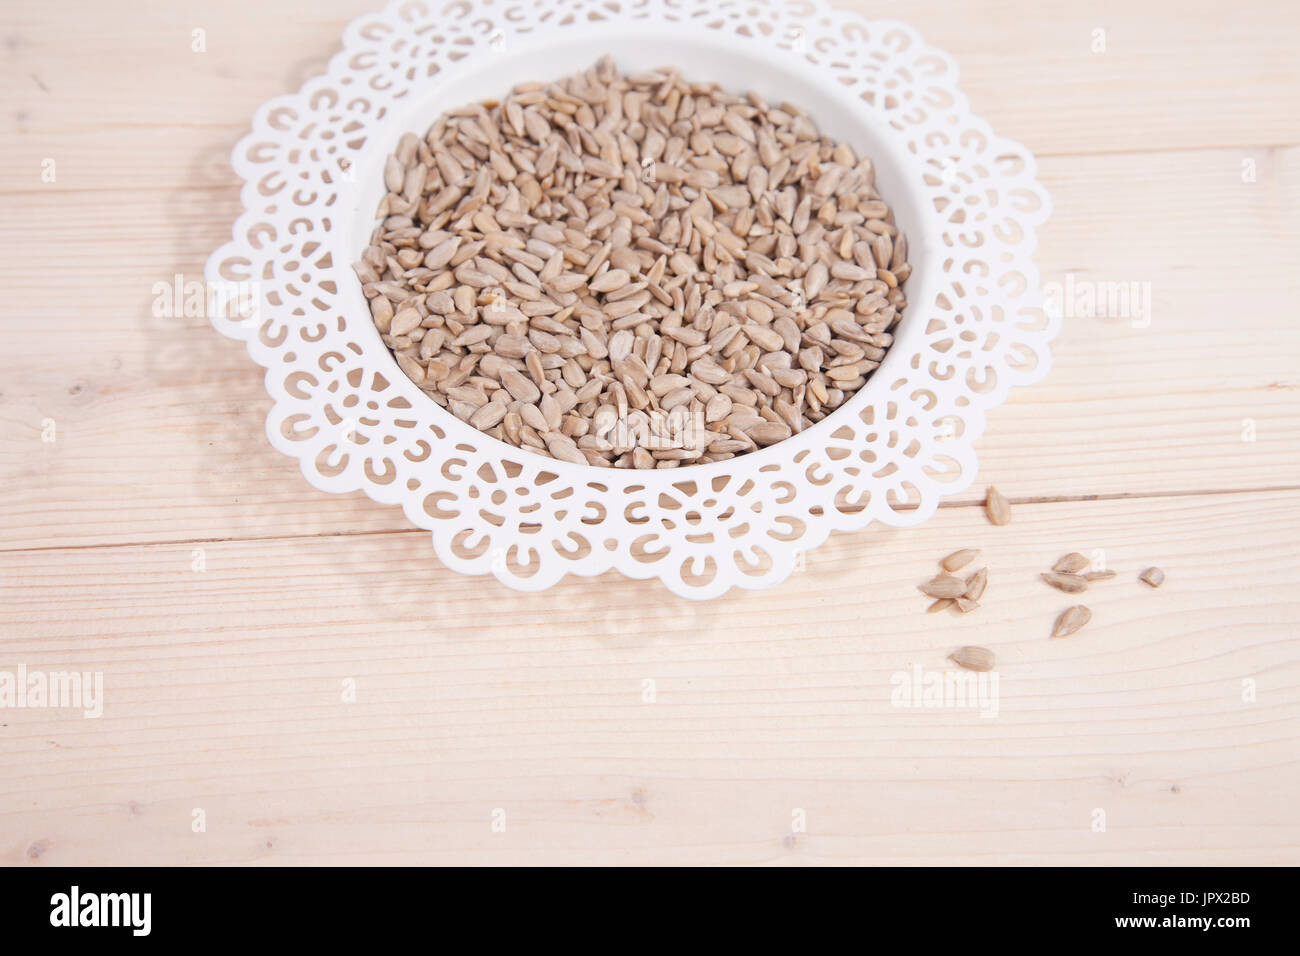 Sunflower seeds in white bowl on wooden background Stock Photo